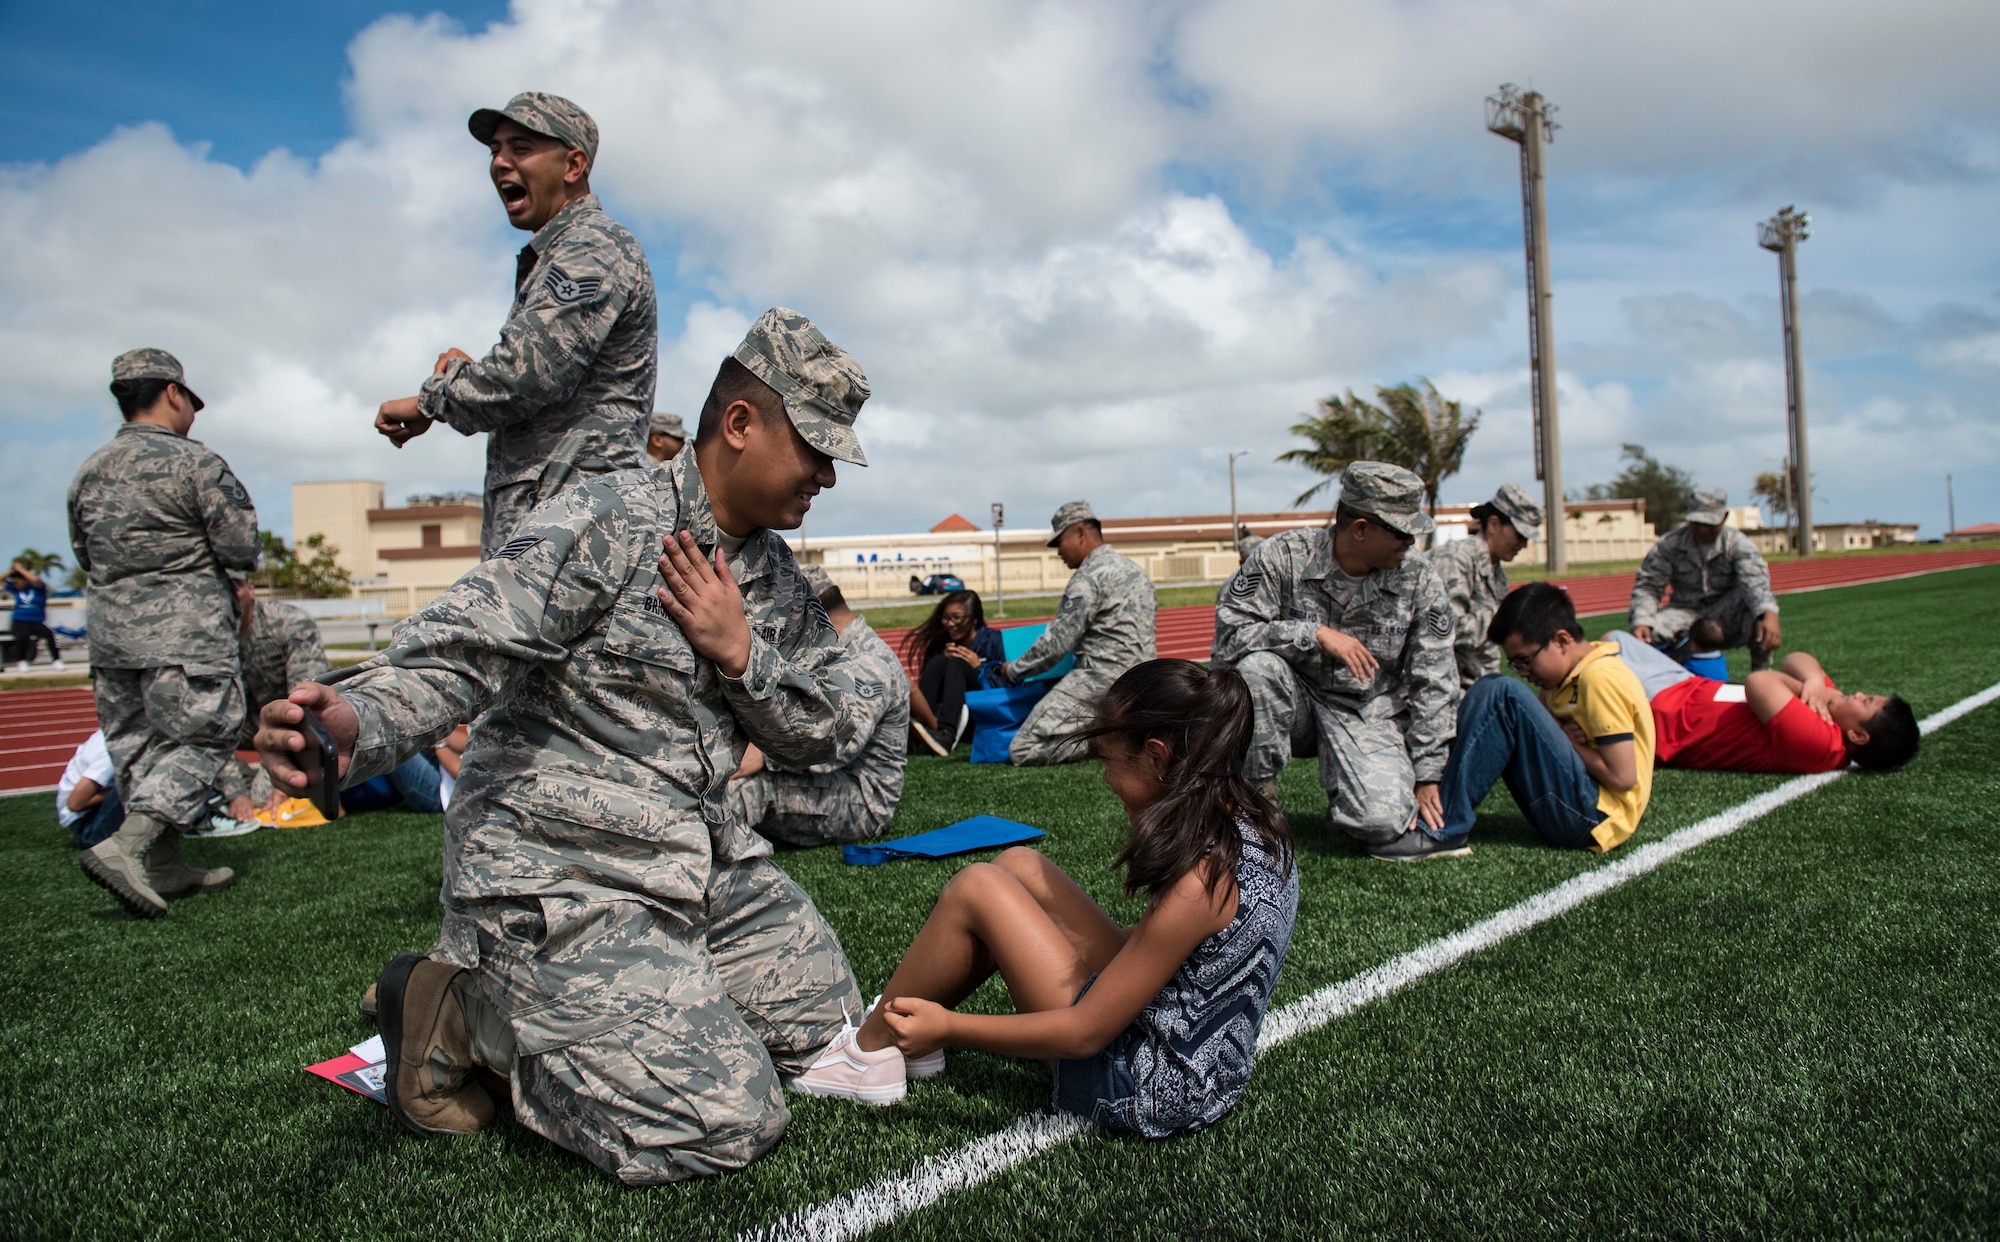 U.S. Air Force Reservists assigned to the 44th Aerial Port Squadron perform physical training games with military children during Operation Inafa’ Maolek at Andersen Air Force Base, May 5, 2018.